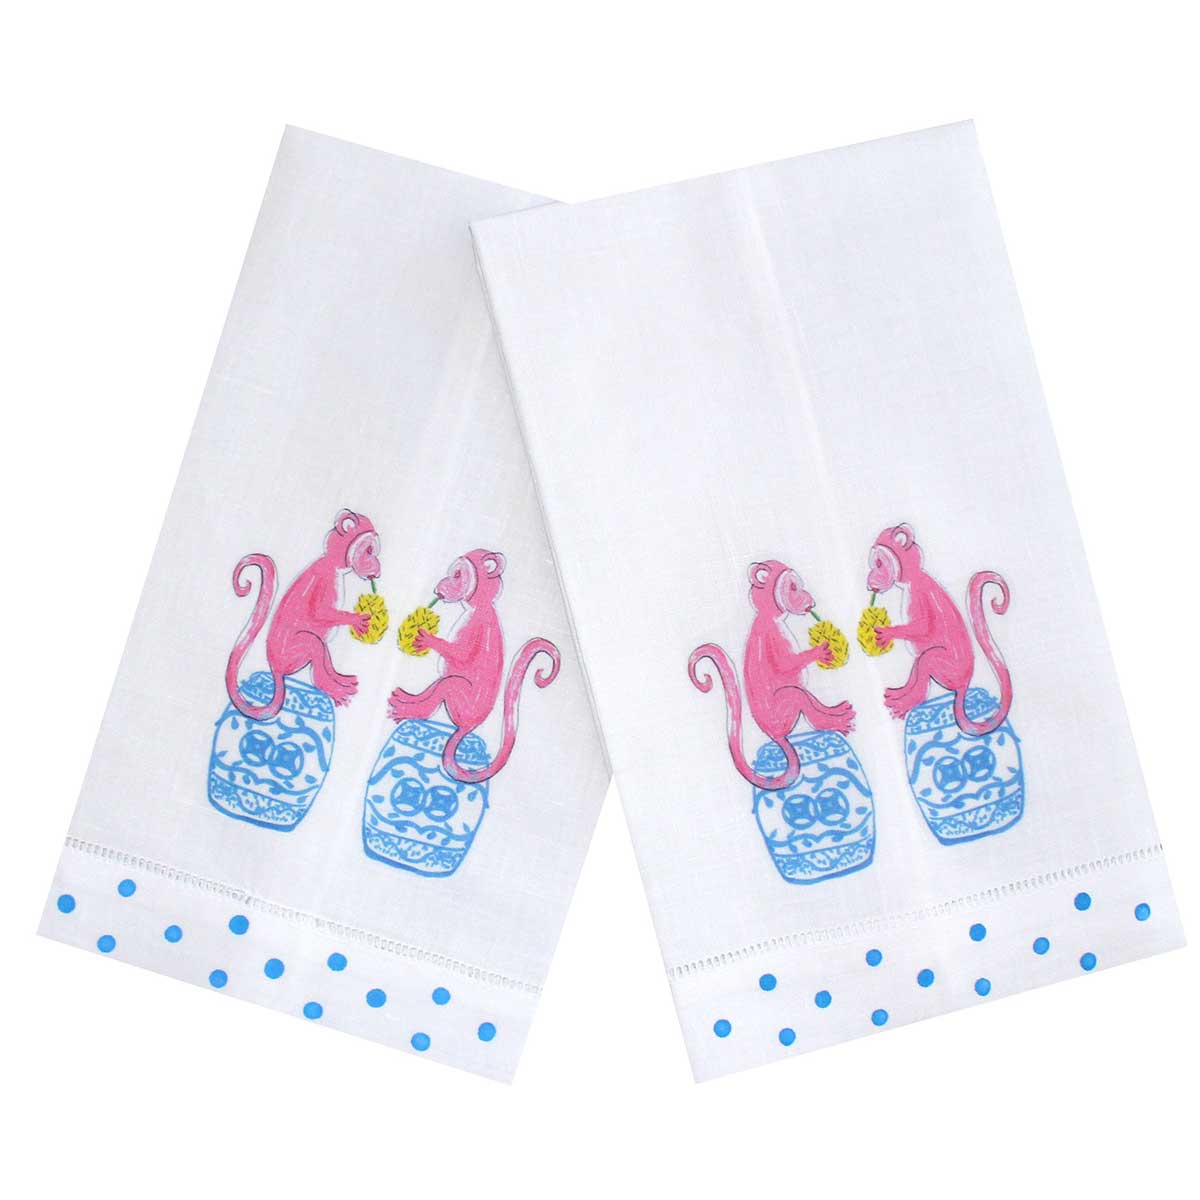 Chinoiserie Monkey Linen Guest Towels